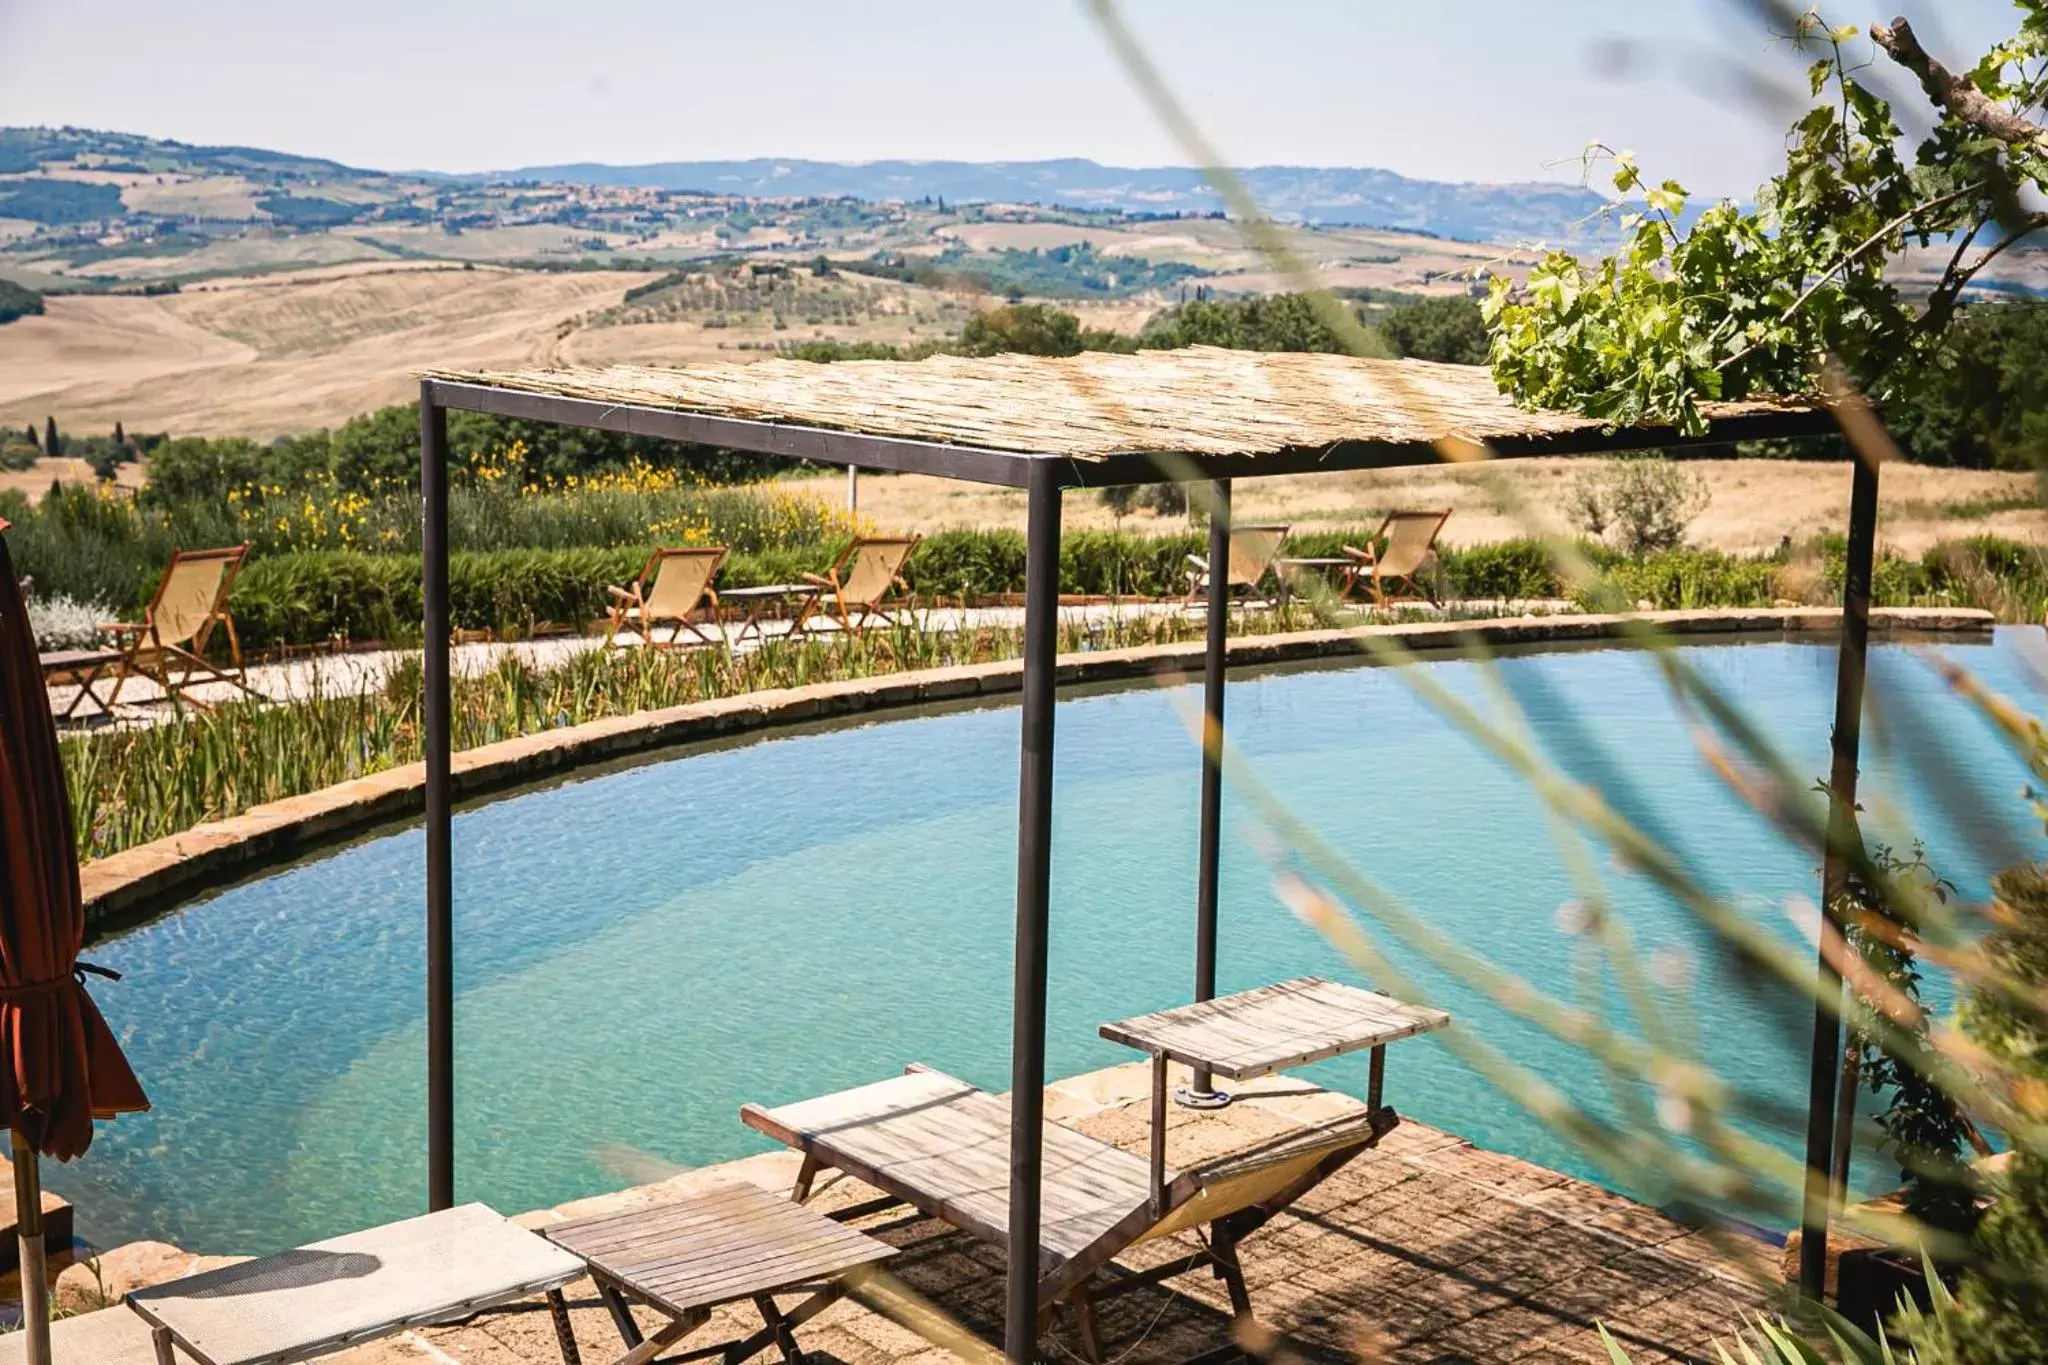 Open Air Bath, Swimming Pool in A440 in Tuscany